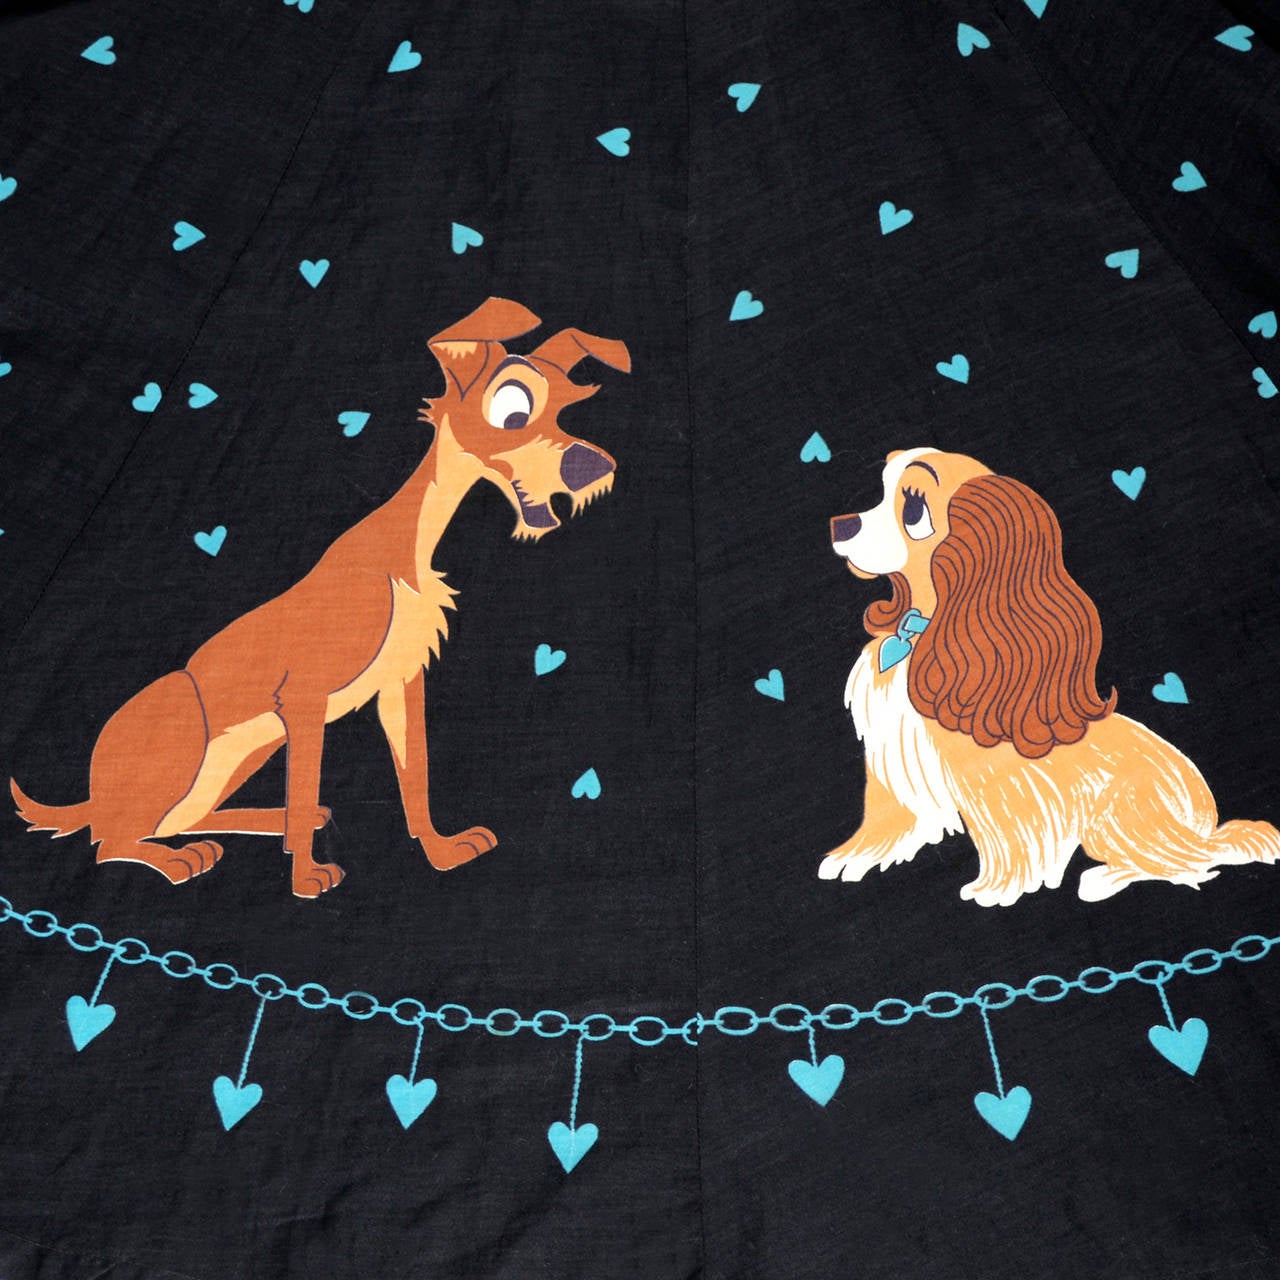 This is a rare vintage cotton skirt from the 1950s made of 16 panels depicting Lady and the Tramp! This adorable novelty print skirt has a metal zipper and a single button closure and measures 30 inches in length. This is an XS skirt as the waist